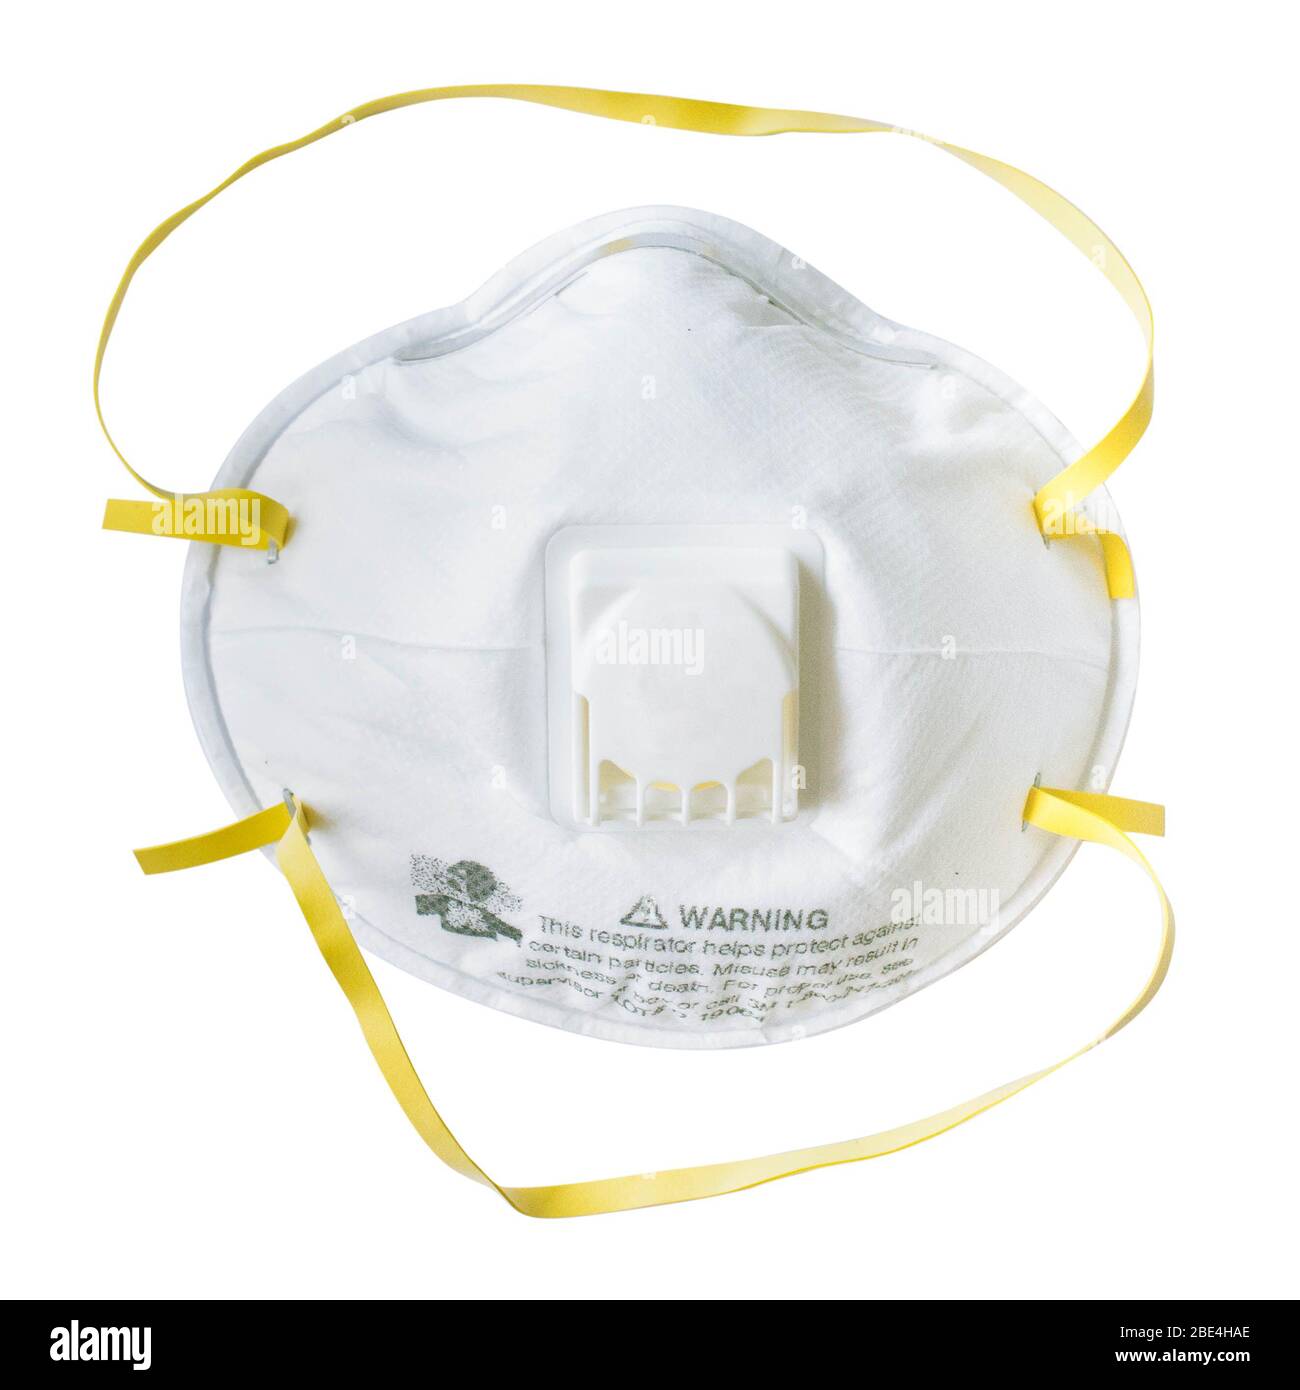 N95 respirator face mask for coronavirus control, isolated on white with clipping mask. Stock Photo